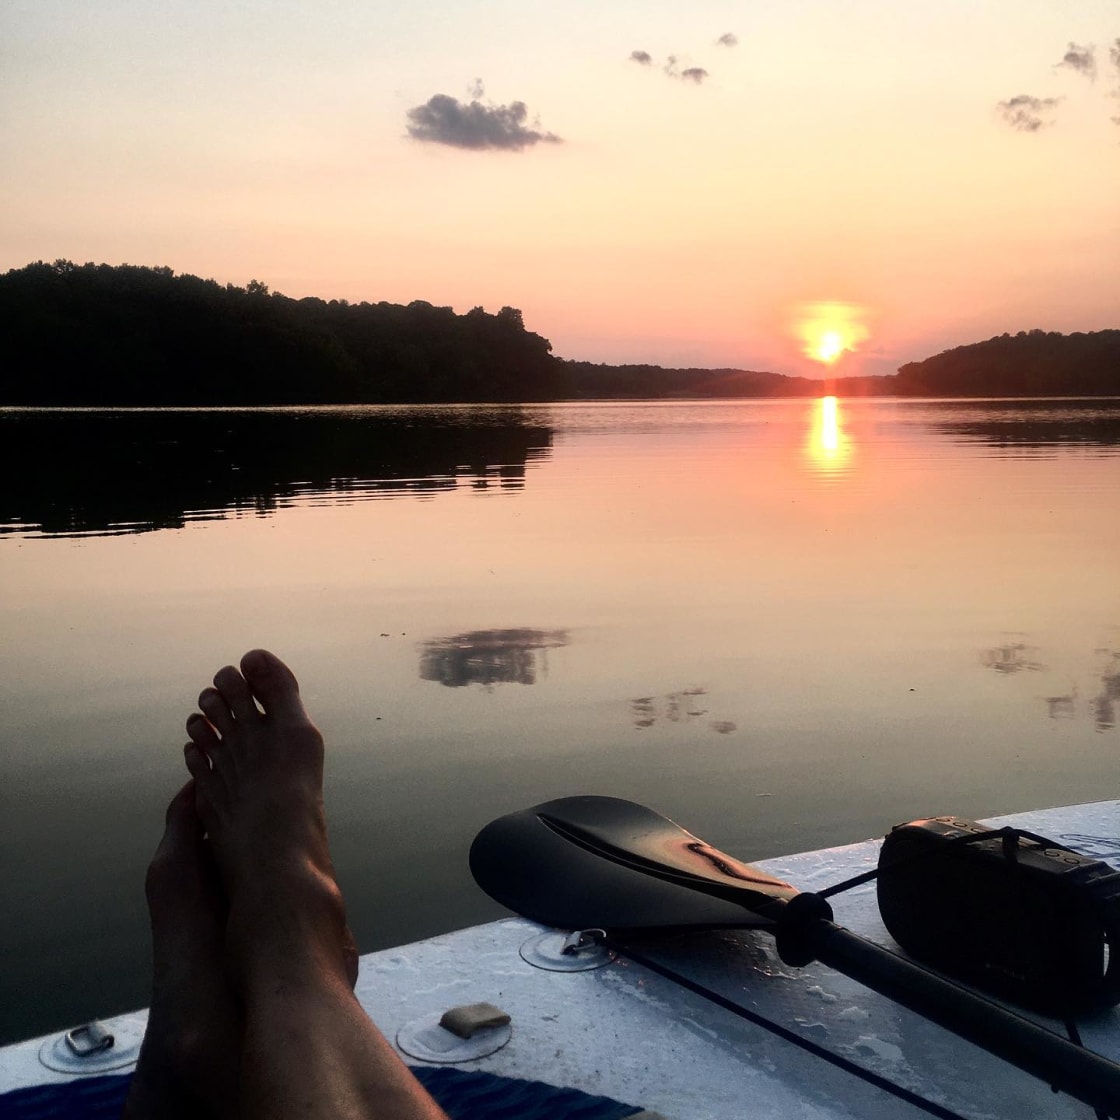 Paint Creek Lake is just 3 miles away and is a lovely spot to catch the sunset.  